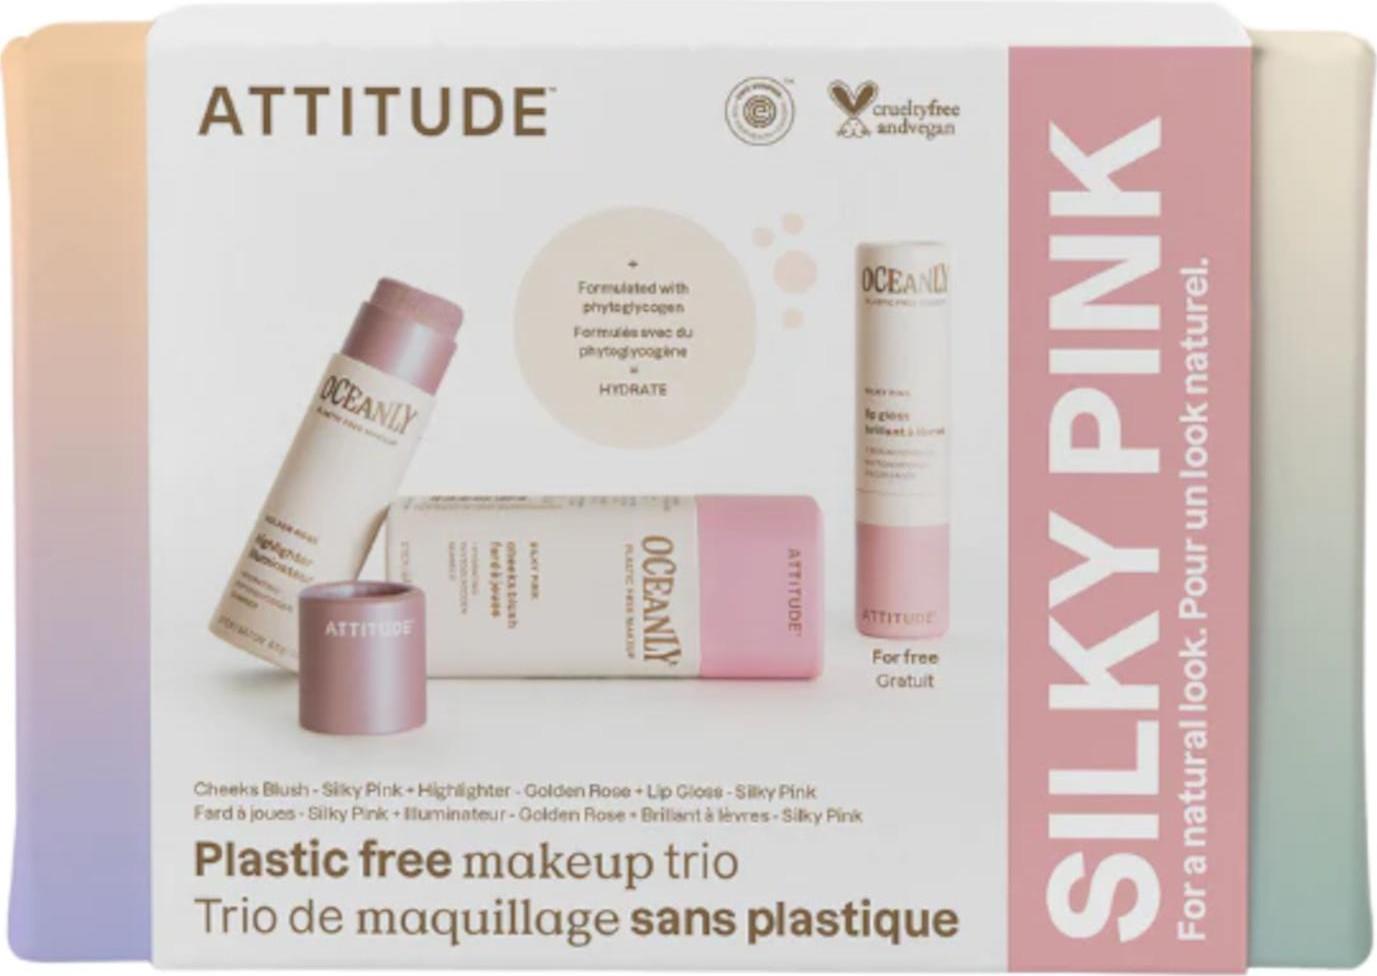 Attitude Make-up set Oceanly - Silky Pink 8